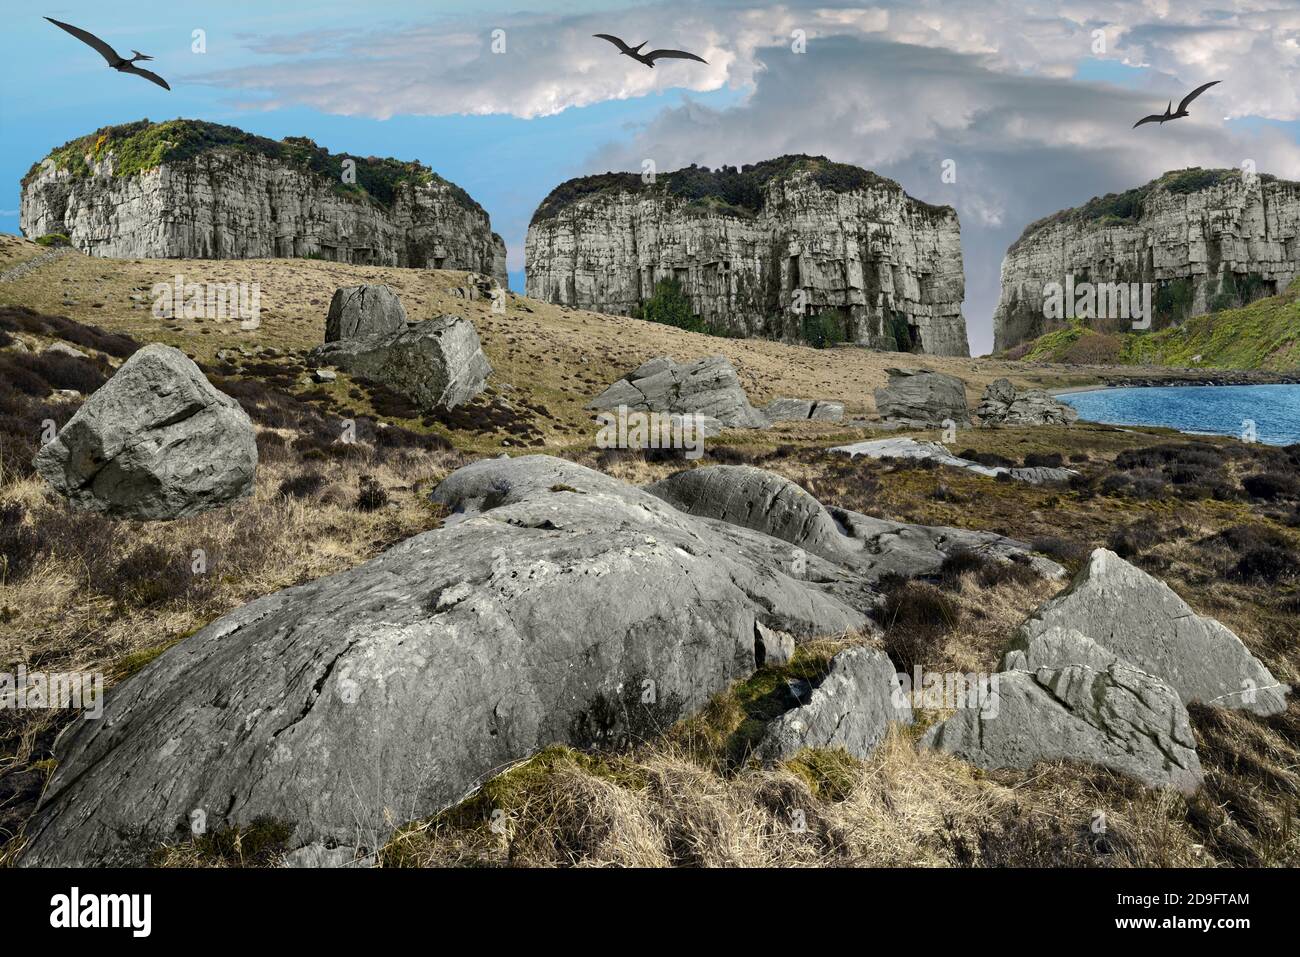 A fantasy vision of the Jurassic period with giant pterodactyls flying over strange table mountains. It includes Castle Rock, Anglesey, and Snowdonia. Stock Photo